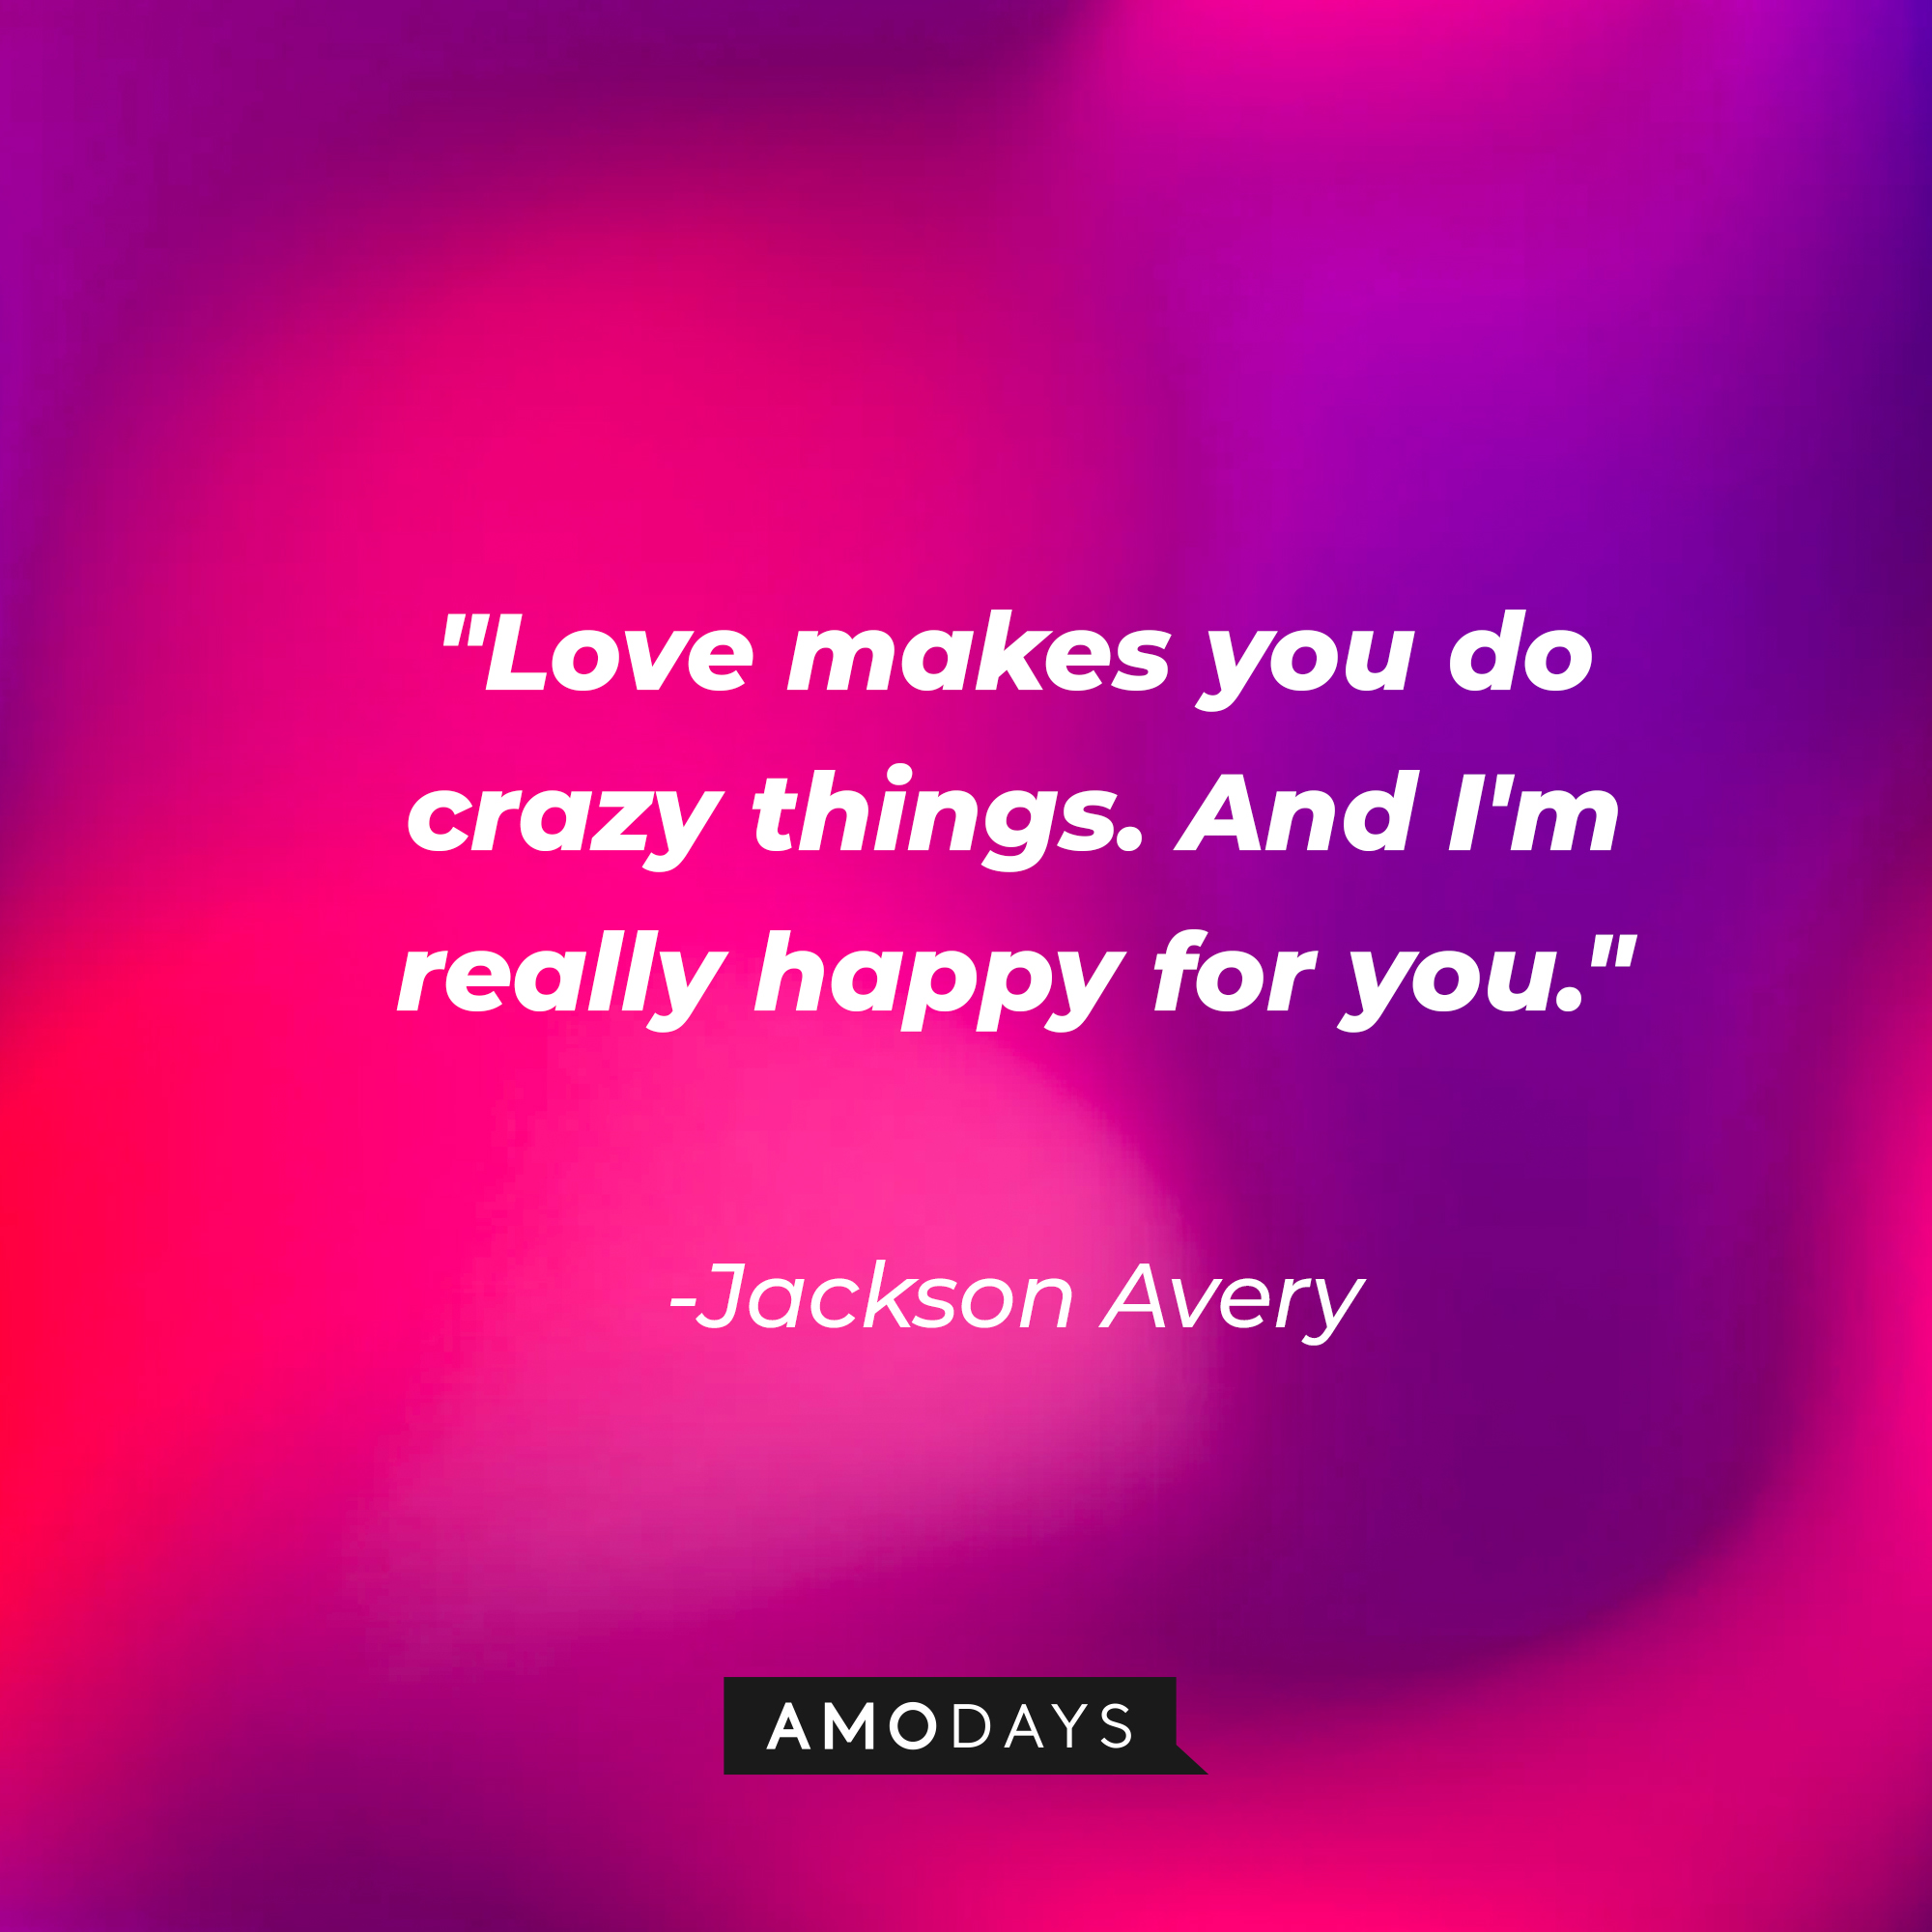 Jackson Avery’s quote: “Love makes you do crazy things. And I'm really happy for you.” |Source: AmoDays